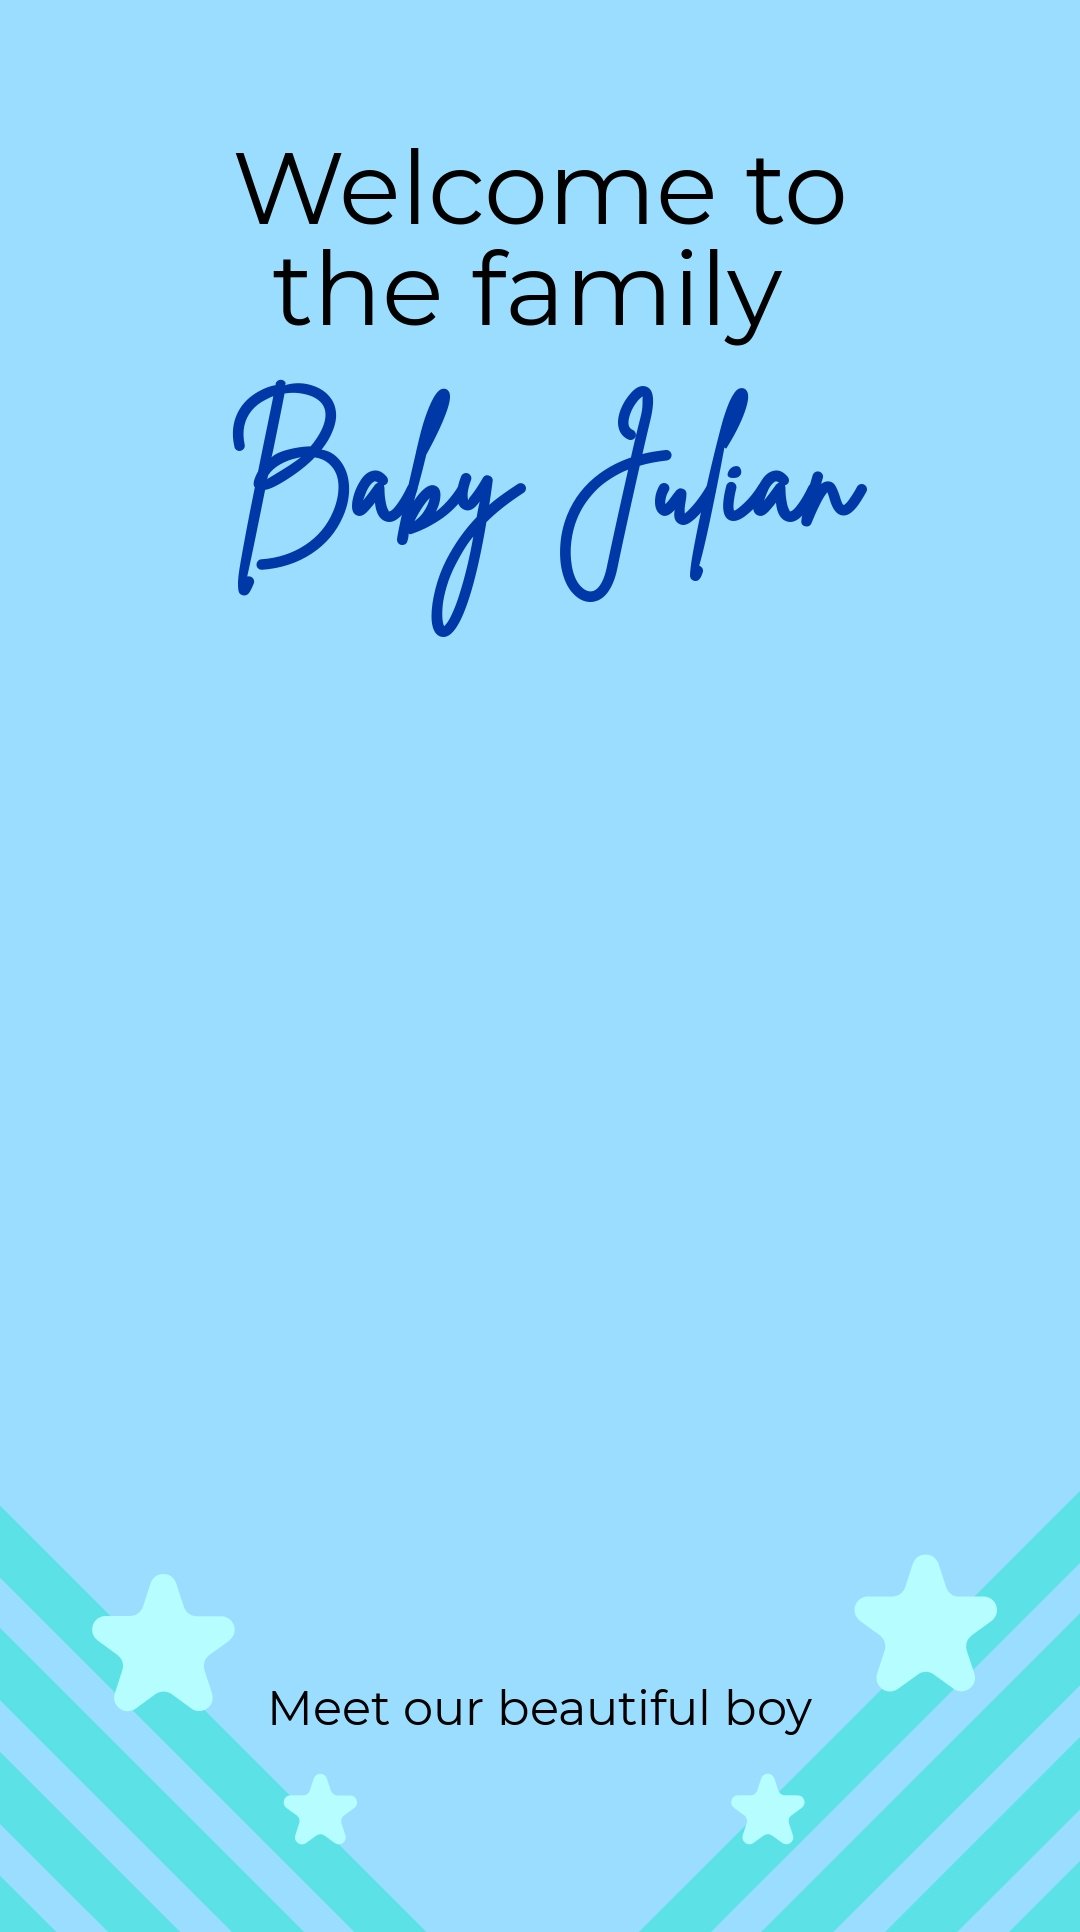 Baby Announcement Photo Snapchat Geofilter Template